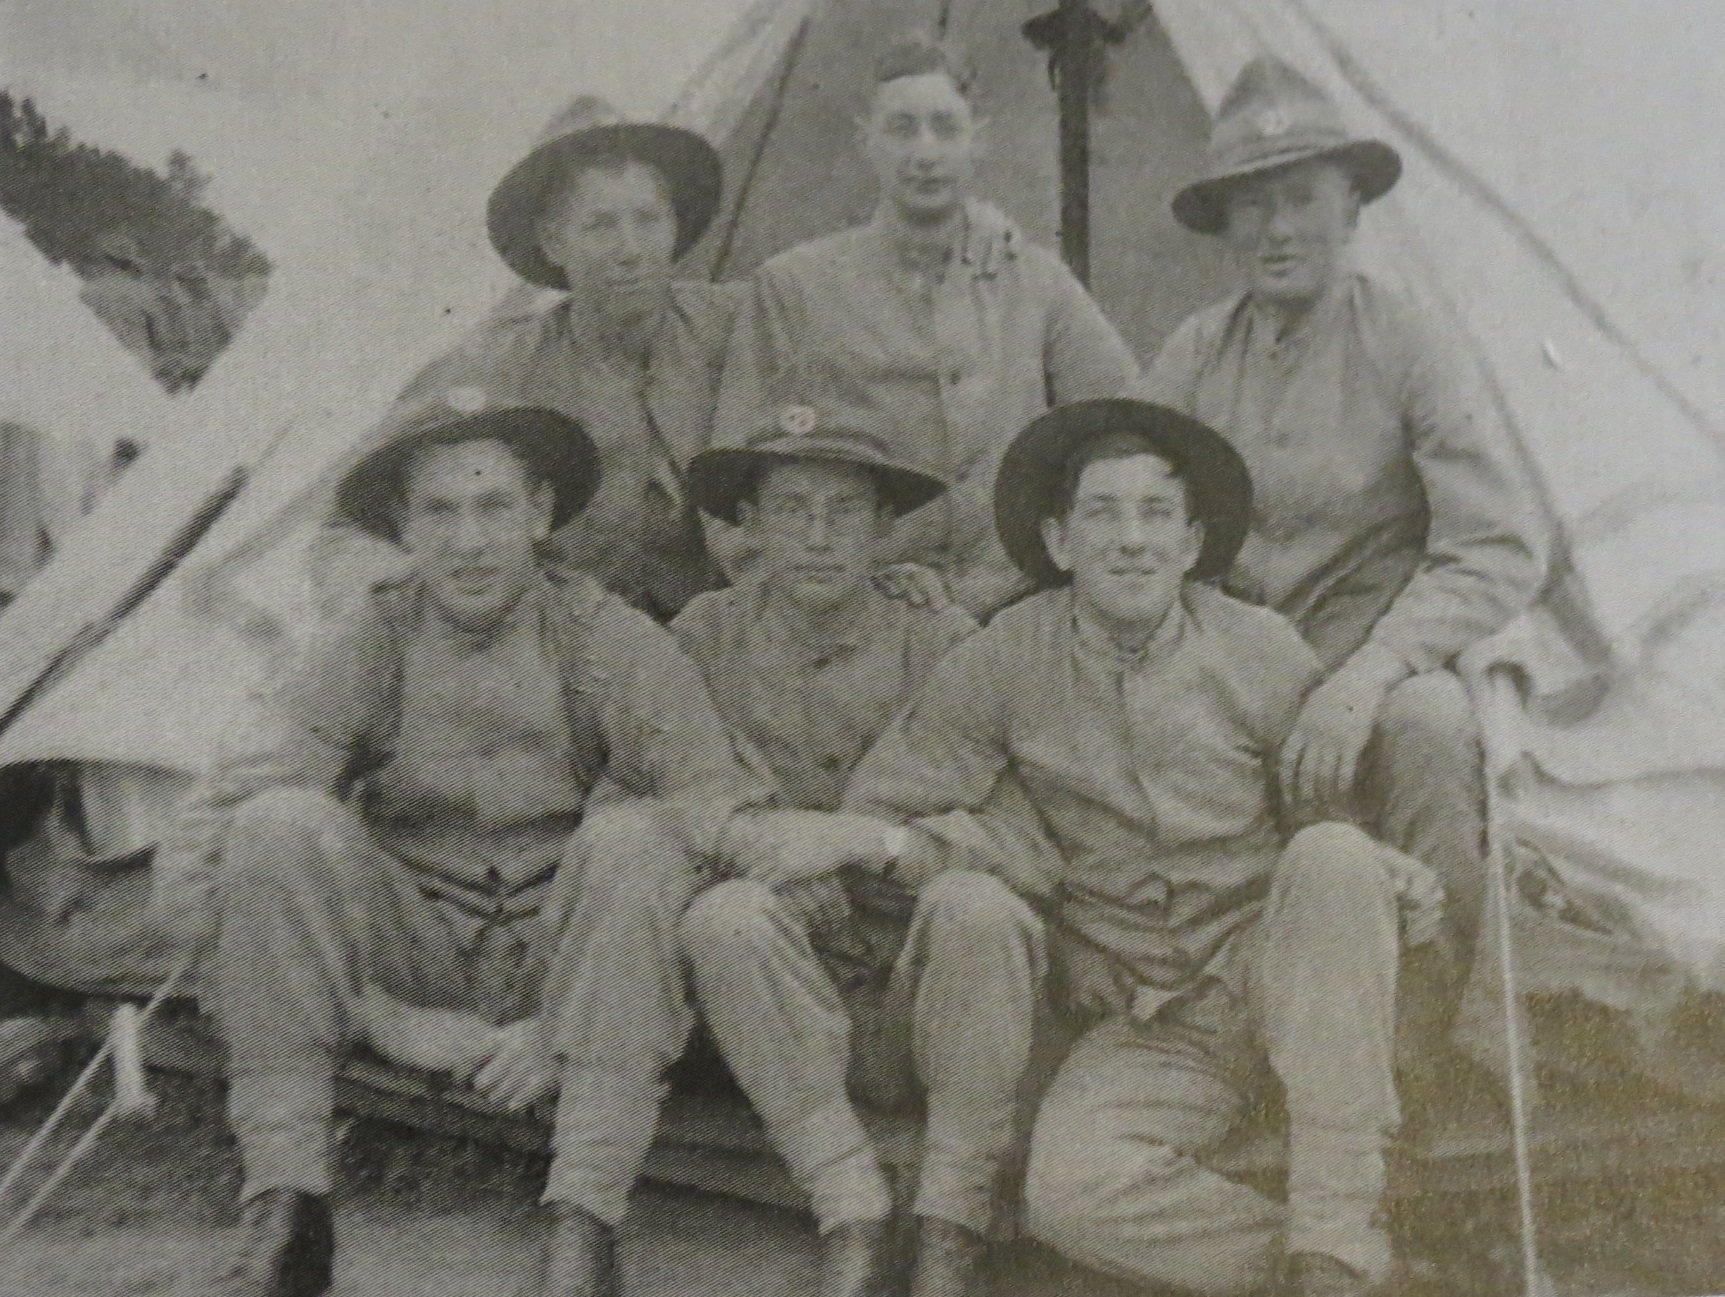 Tom Landreth (front left) in camp with his comrades, (back, from left) Ron McNeur, Harry Gapper,...